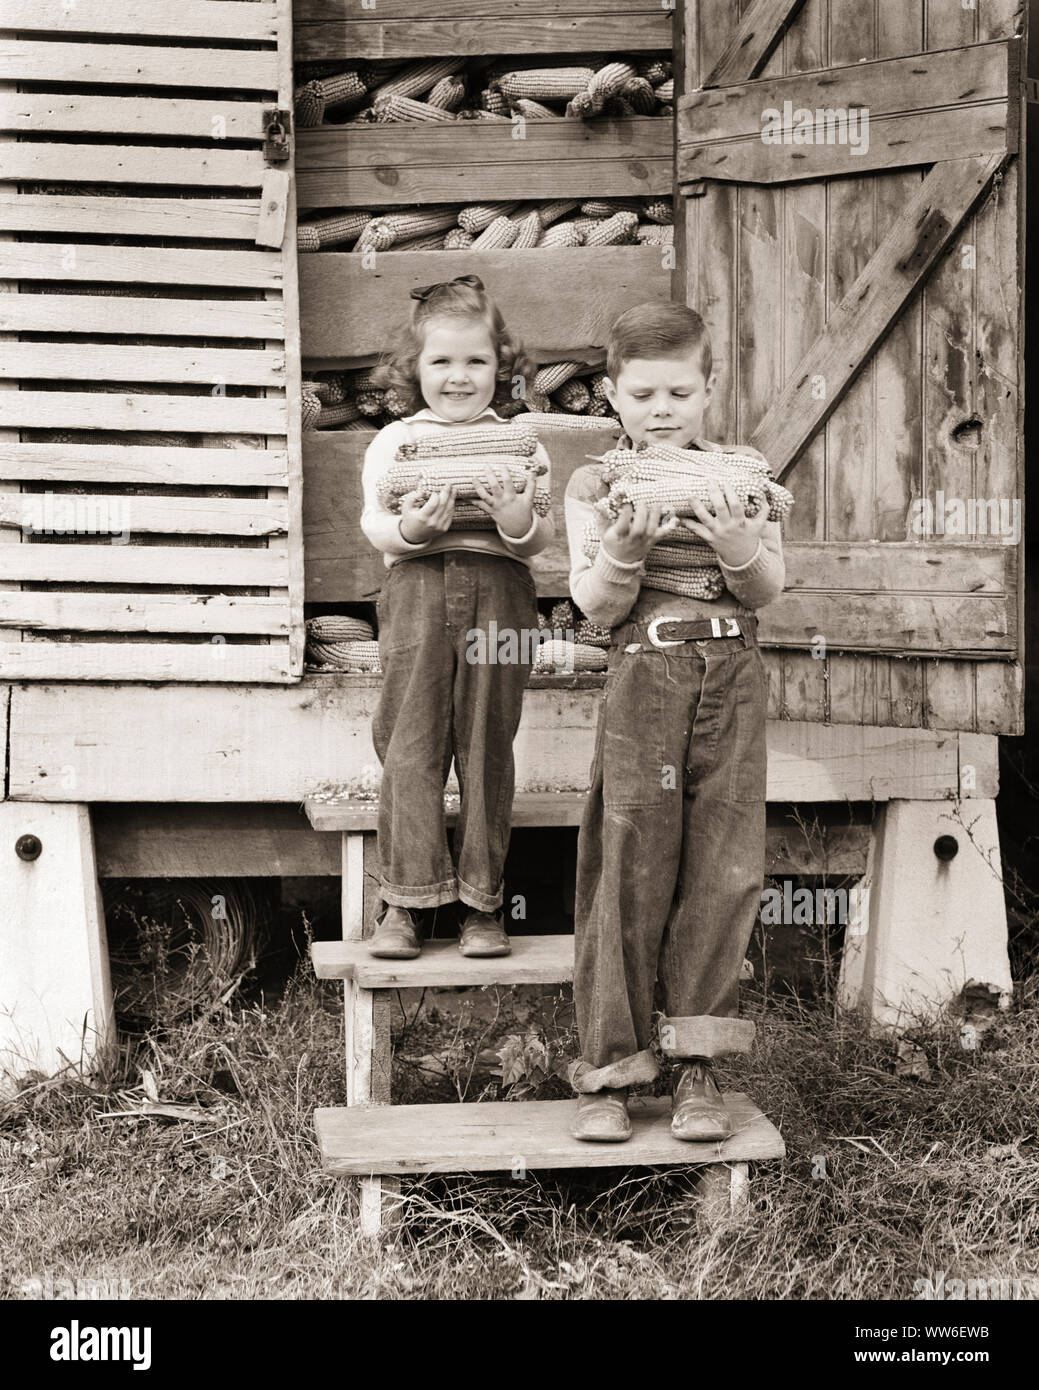 1940s TWO CUTE FARM CHILDREN SMILING SISTER DOUR BROTHER IN BLUE JEANS HOLDING EARS OF CORN ON STEPS TO CRIB LOOKING AT CAMERA - c1403 HAR001 HARS CORN JUVENILE CUTE EARS STYLE TEAMWORK COTTON JOY LIFESTYLE CELEBRATION FEMALES BROTHERS RURAL HOME LIFE UNITED STATES COPY SPACE FRIENDSHIP FULL-LENGTH UNITED STATES OF AMERICA FARMING MALES SIBLINGS CONFIDENCE DENIM SISTERS CRIB AGRICULTURE B&W SADNESS NORTH AMERICA EYE CONTACT NORTH AMERICAN HAPPINESS RUSTIC STRENGTH EXTERIOR FARMERS PRIDE IN OF ON TO SIBLING CONCEPTUAL BLUE JEANS CHARMING GROWTH INFORMAL JUVENILES TOGETHERNESS TWILL YOUNGSTER Stock Photo